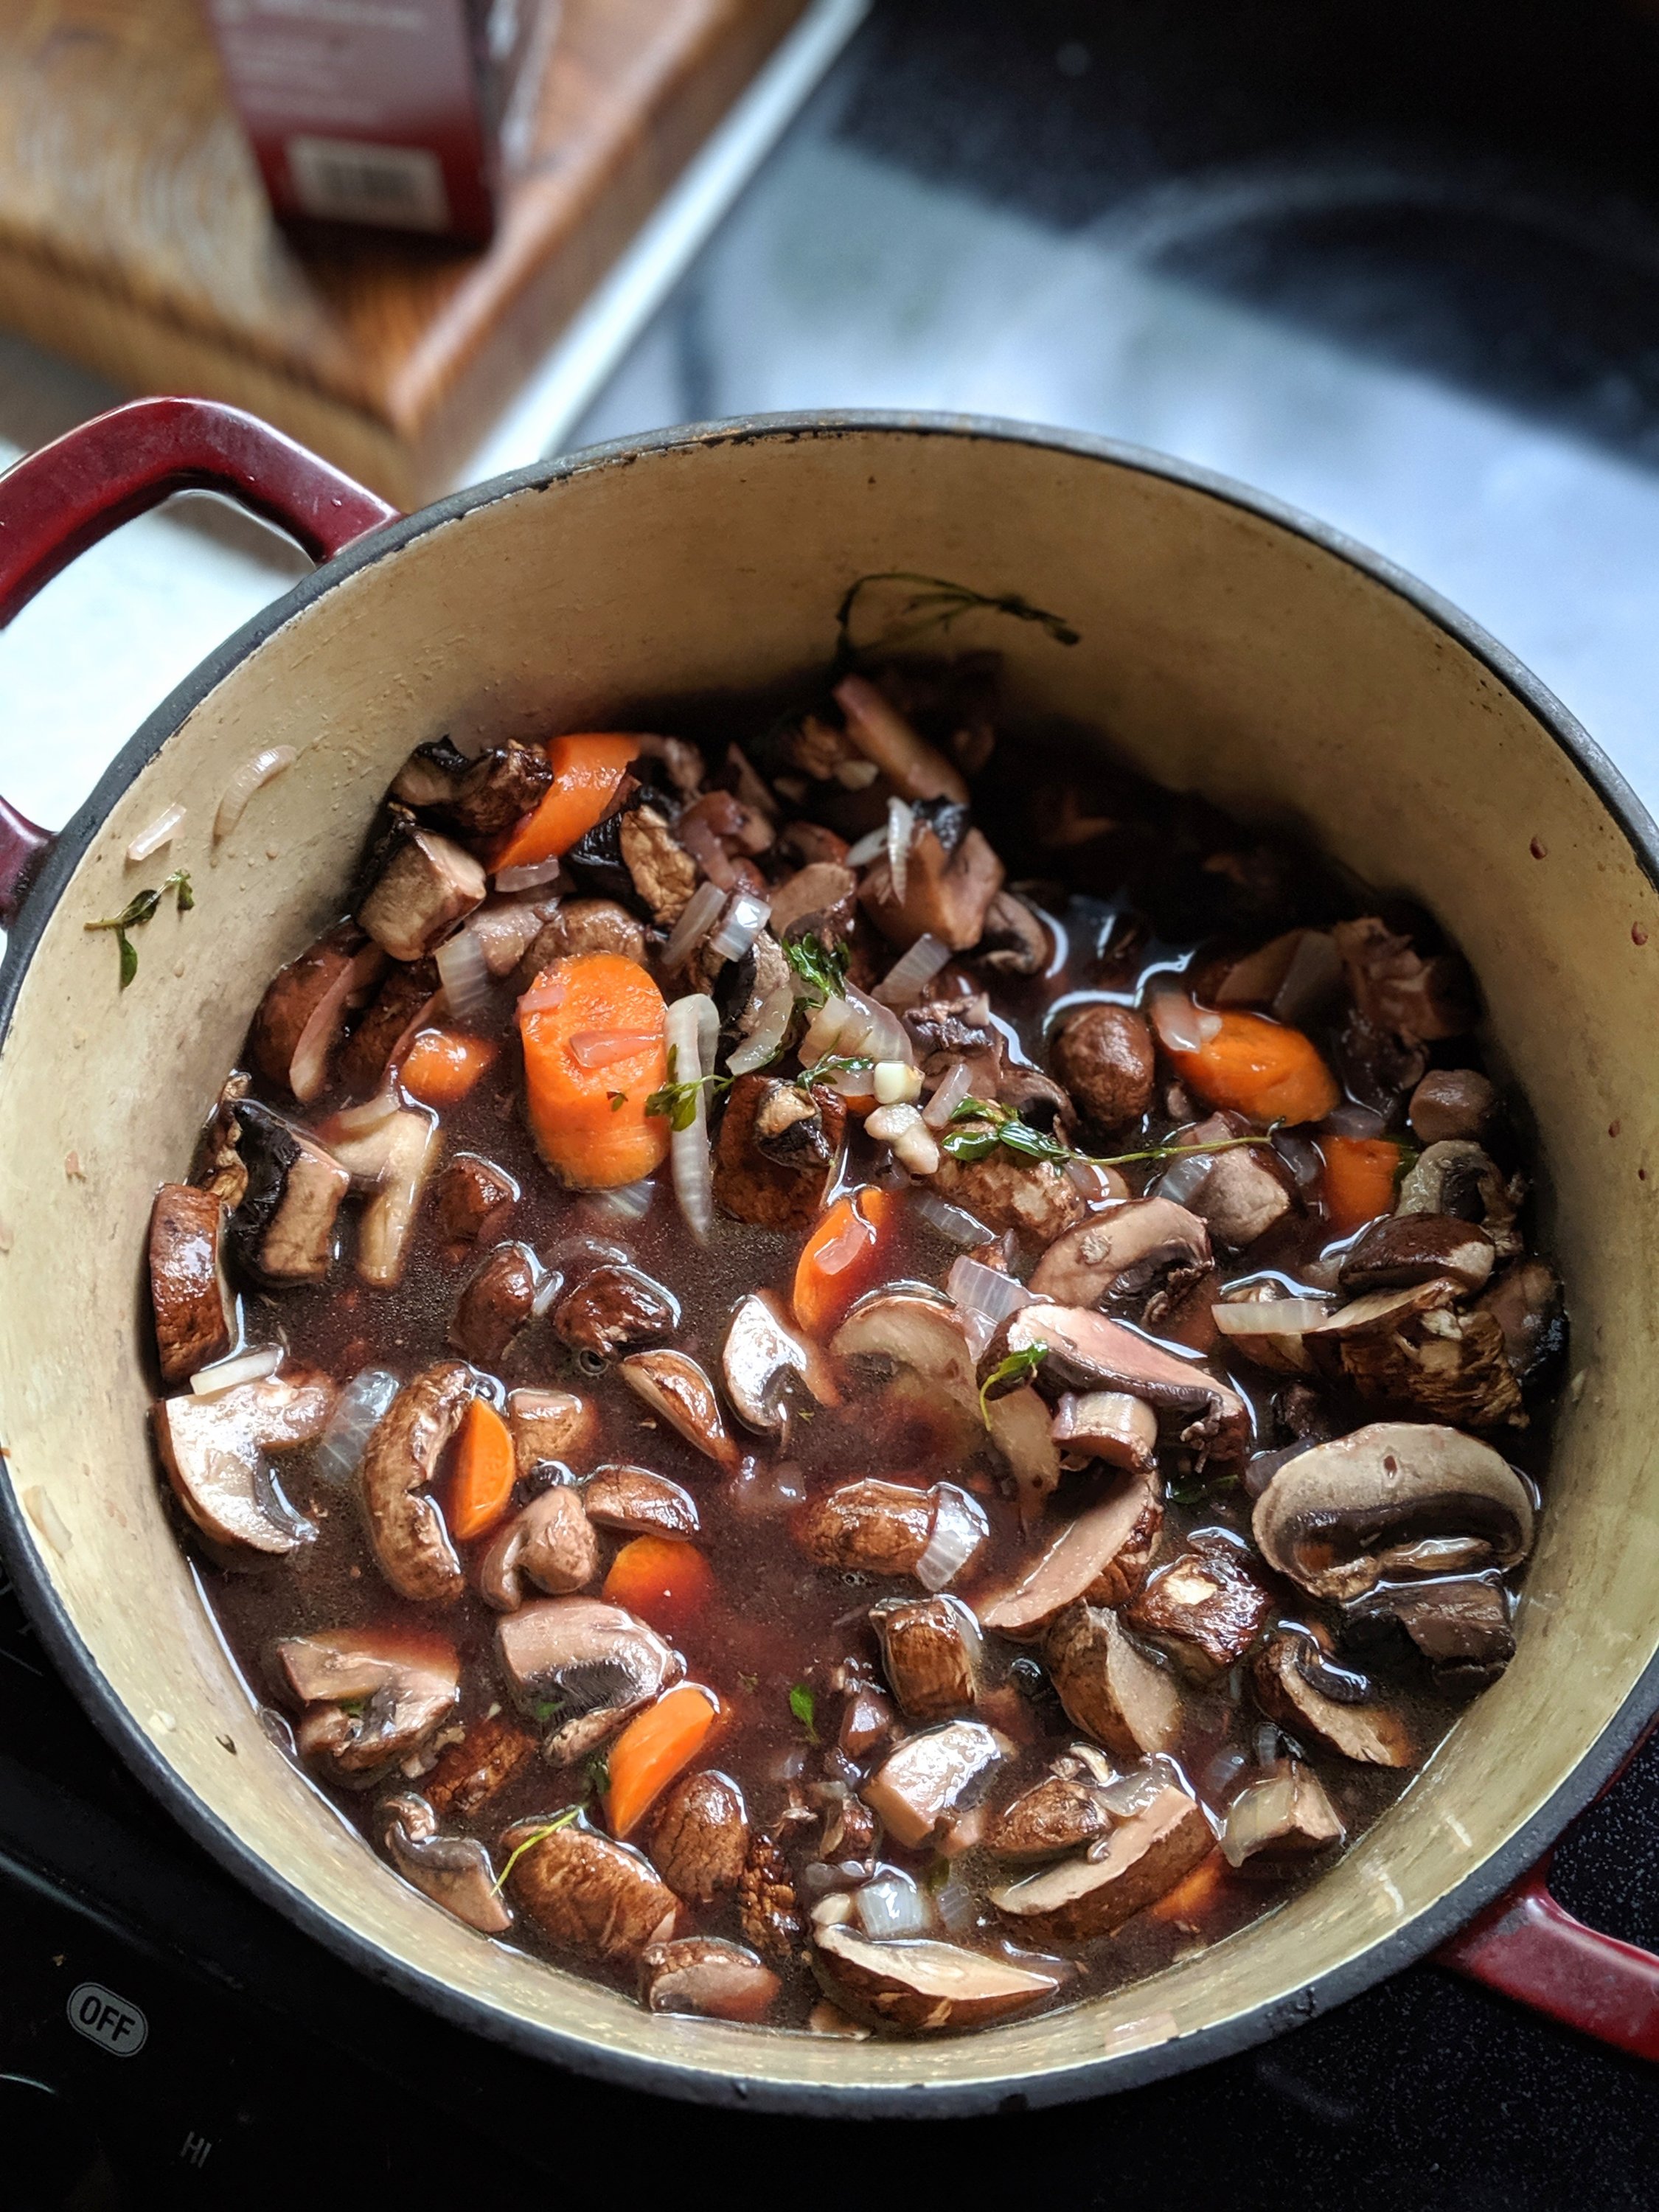 gluten free Mushroom Bourguignon Recipe with red wine mushroom stew vegan fresh recipes with carrots root vegetable buirguignon at home plant based